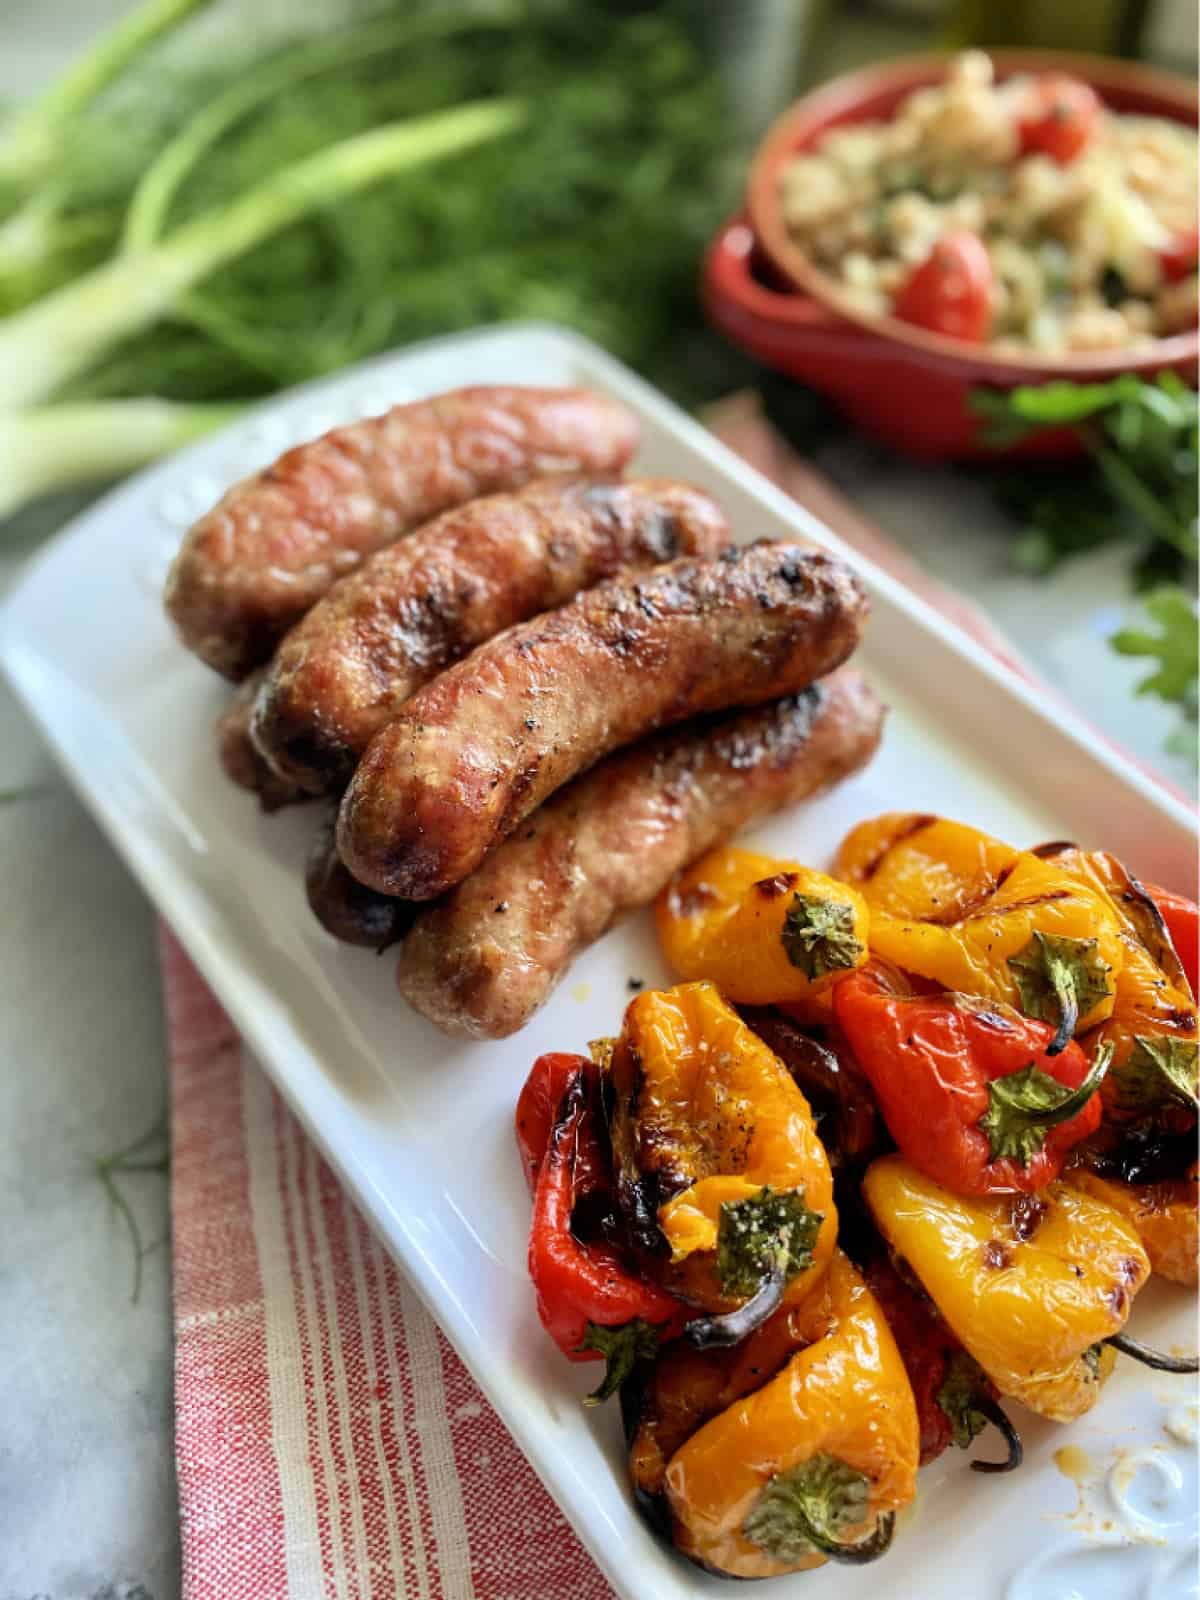 White platter resting on red and white striped cloth holding grilled sausage and bell peppers.